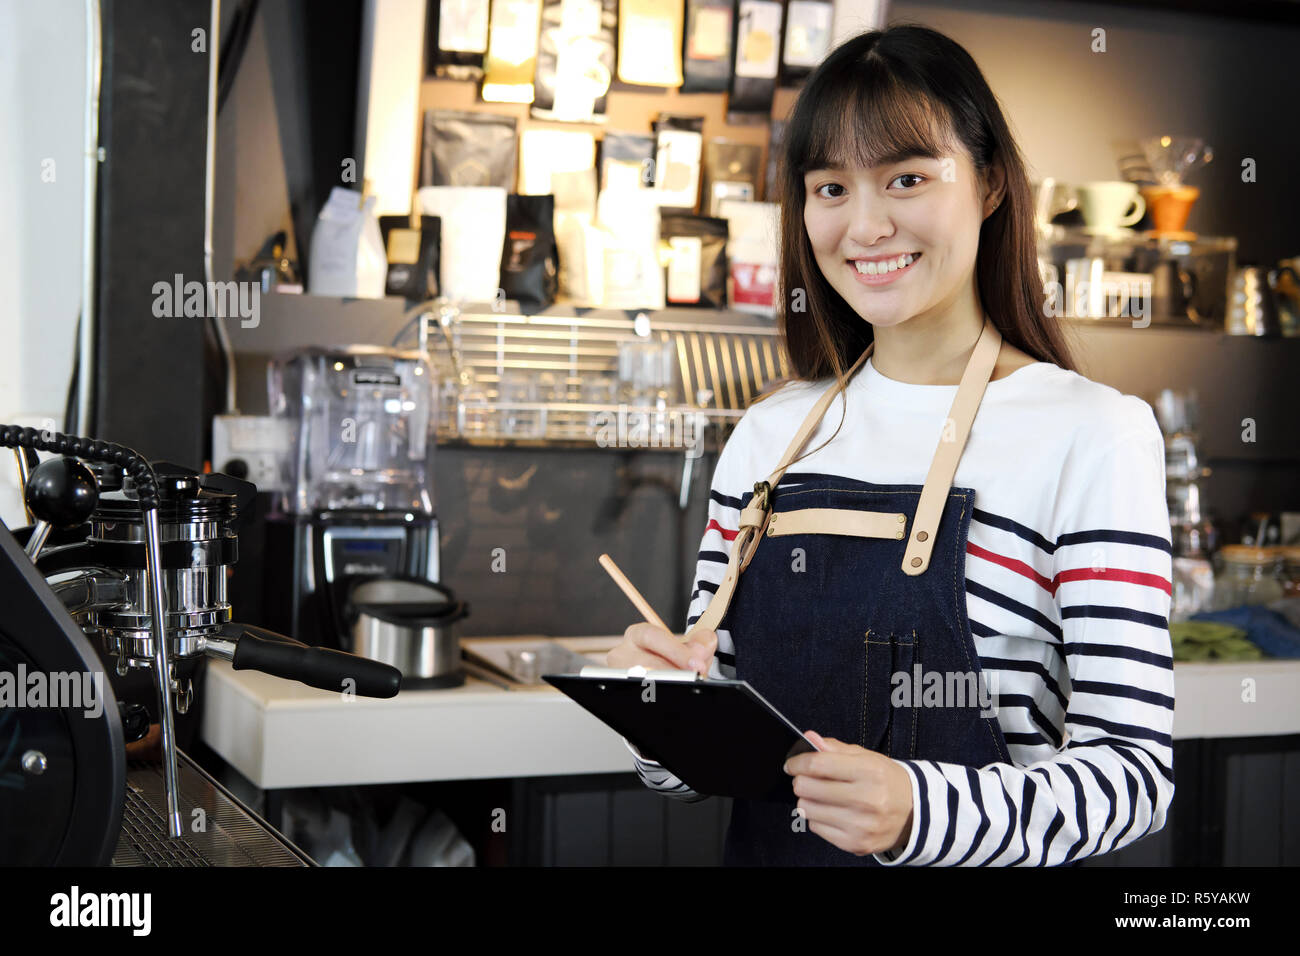 Portrait of smiling asian barista listing food. Cafe restaurant service, food and drink industry concept. Stock Photo